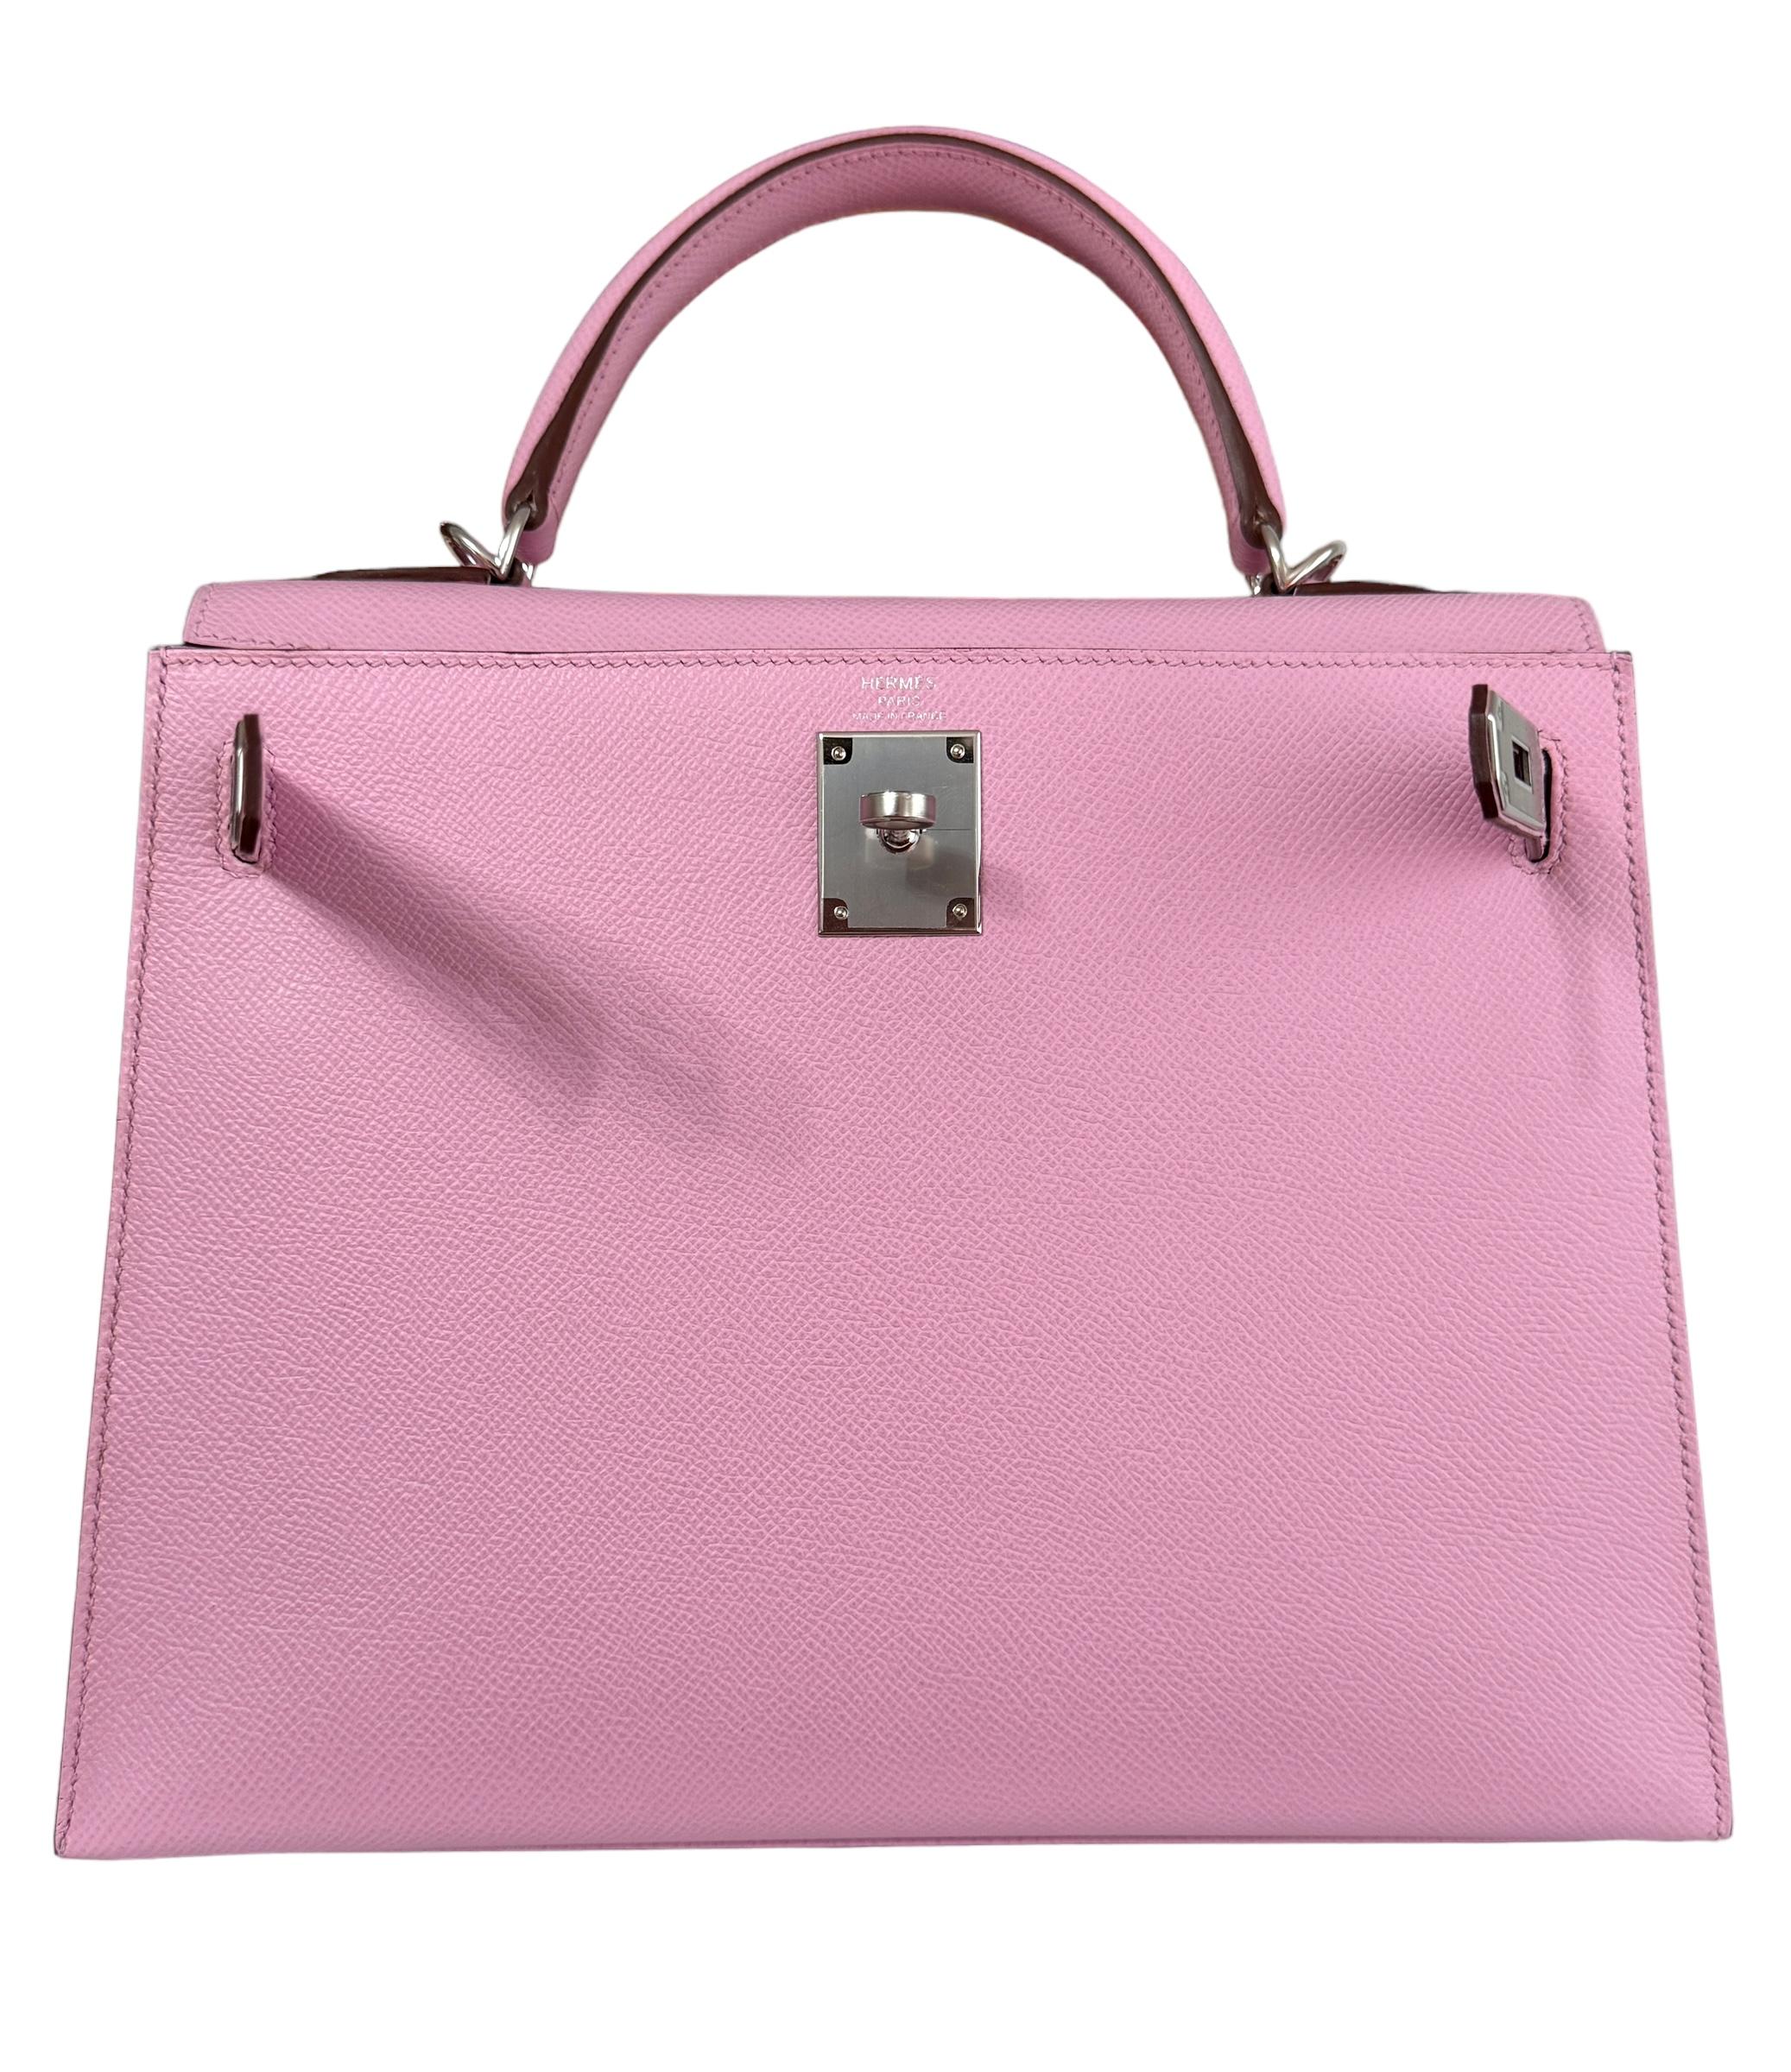 Absolutely Stunning Rare and Most Coveted As New 2022 RARE Hermes Kelly 28 Sellier Mauve Sylvester Epsom Leather , Complimented by Palladium Hardware. AS NEW U STAMP 2022. Includes all accessories and Box. 

Shop with Confidence from Lux Addicts.